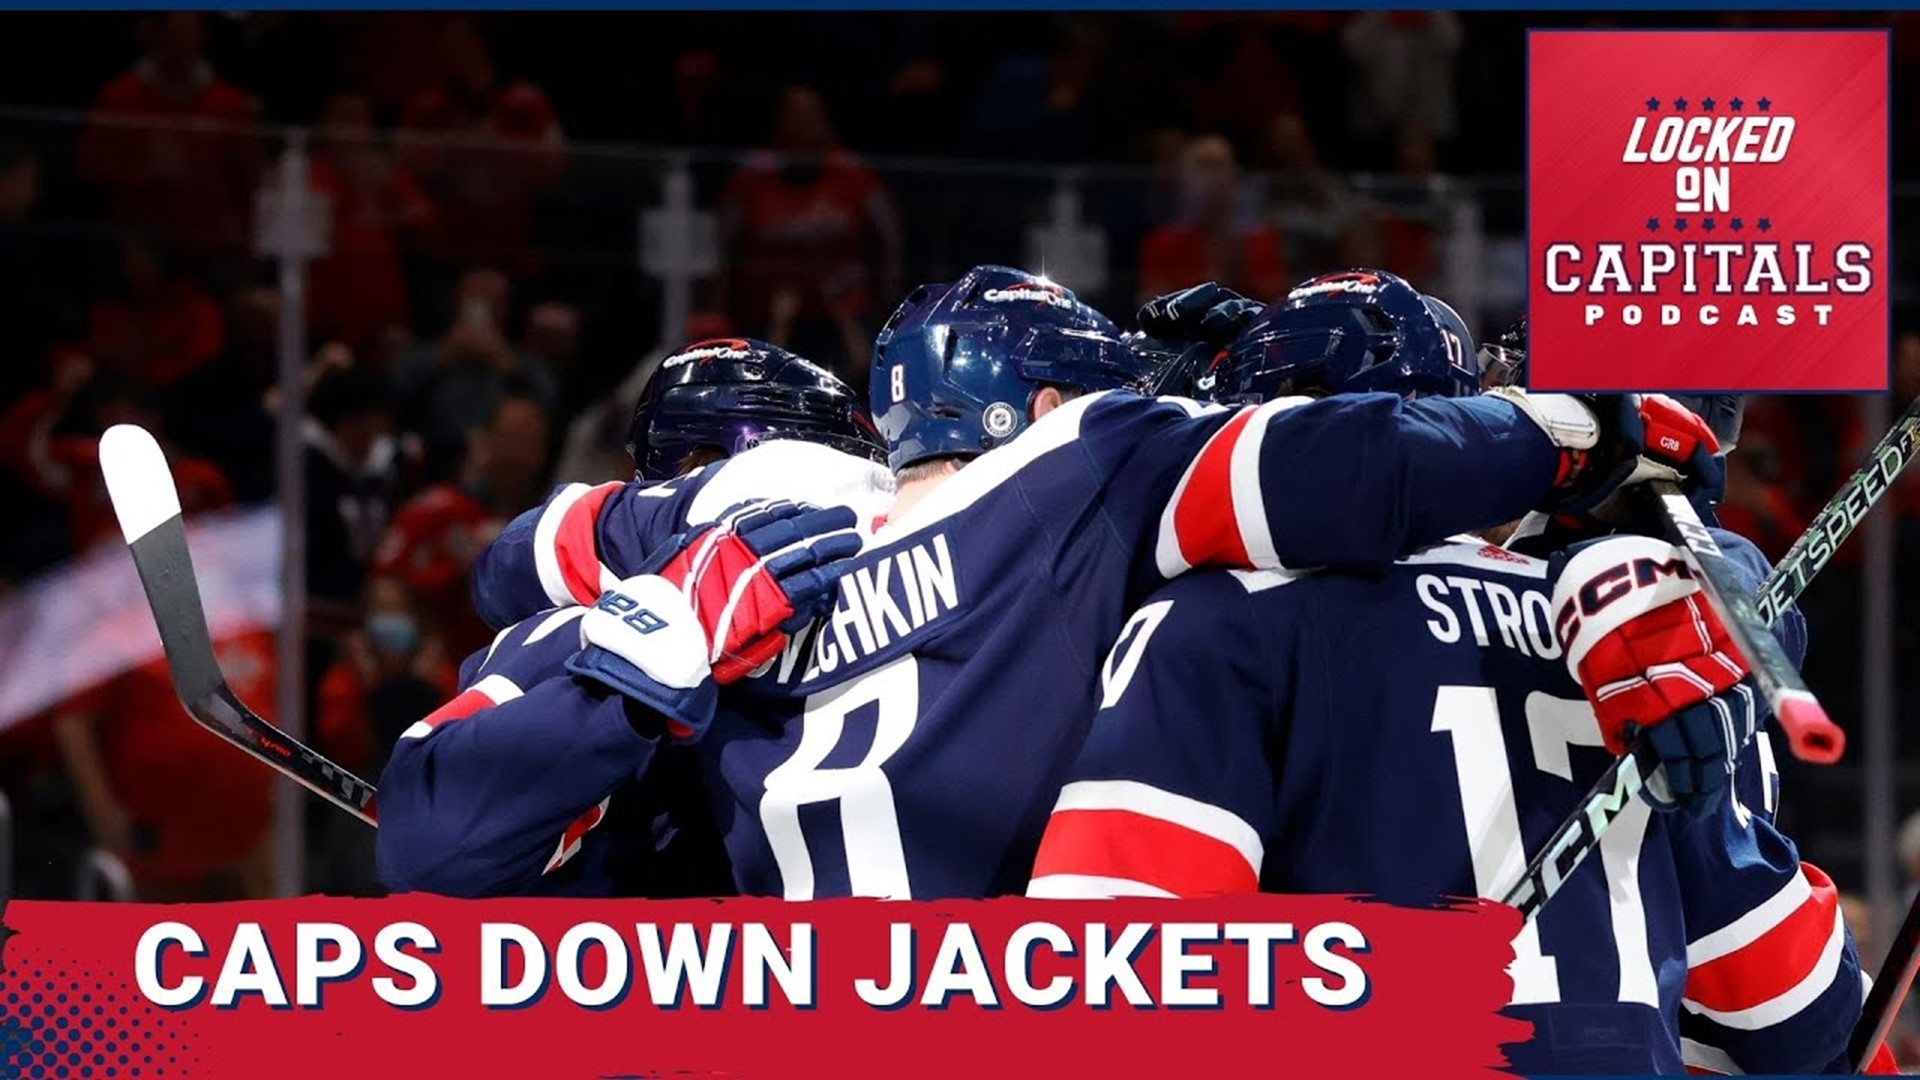 In this edition of Locked on Capitals Dan talks about the Capitals defeat of the Columbus Blue Jackets by a score of 6-2